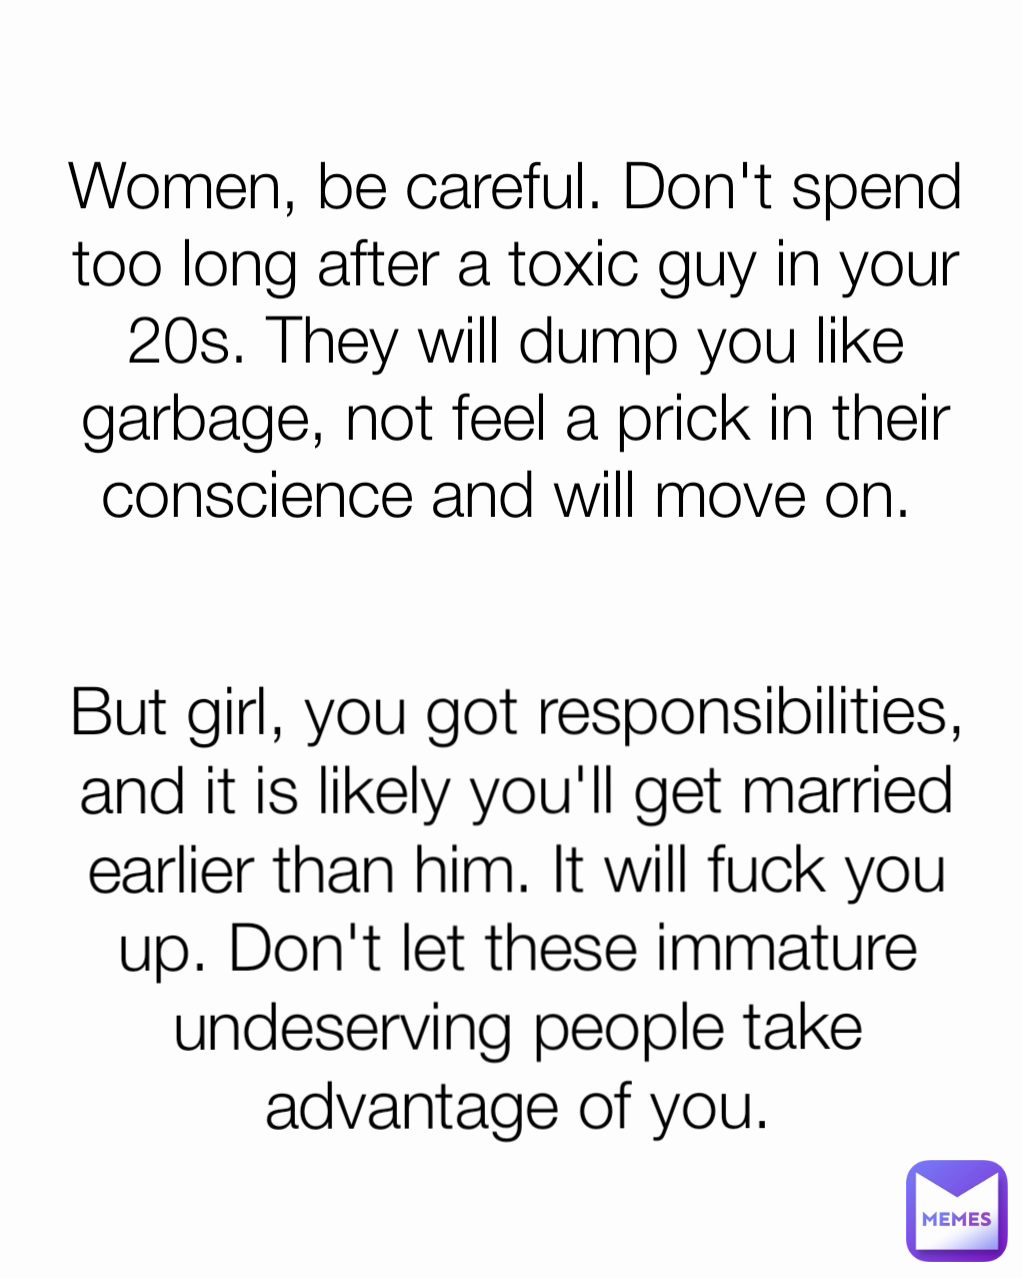 But girl, you got responsibilities, and it is likely you'll get married earlier than him. It will fuck you up. Don't let these immature undeserving people take advantage of you. Women, be careful. Don't spend too long after a toxic guy in your 20s. They will dump you like garbage, not feel a prick in their conscience and will move on. 